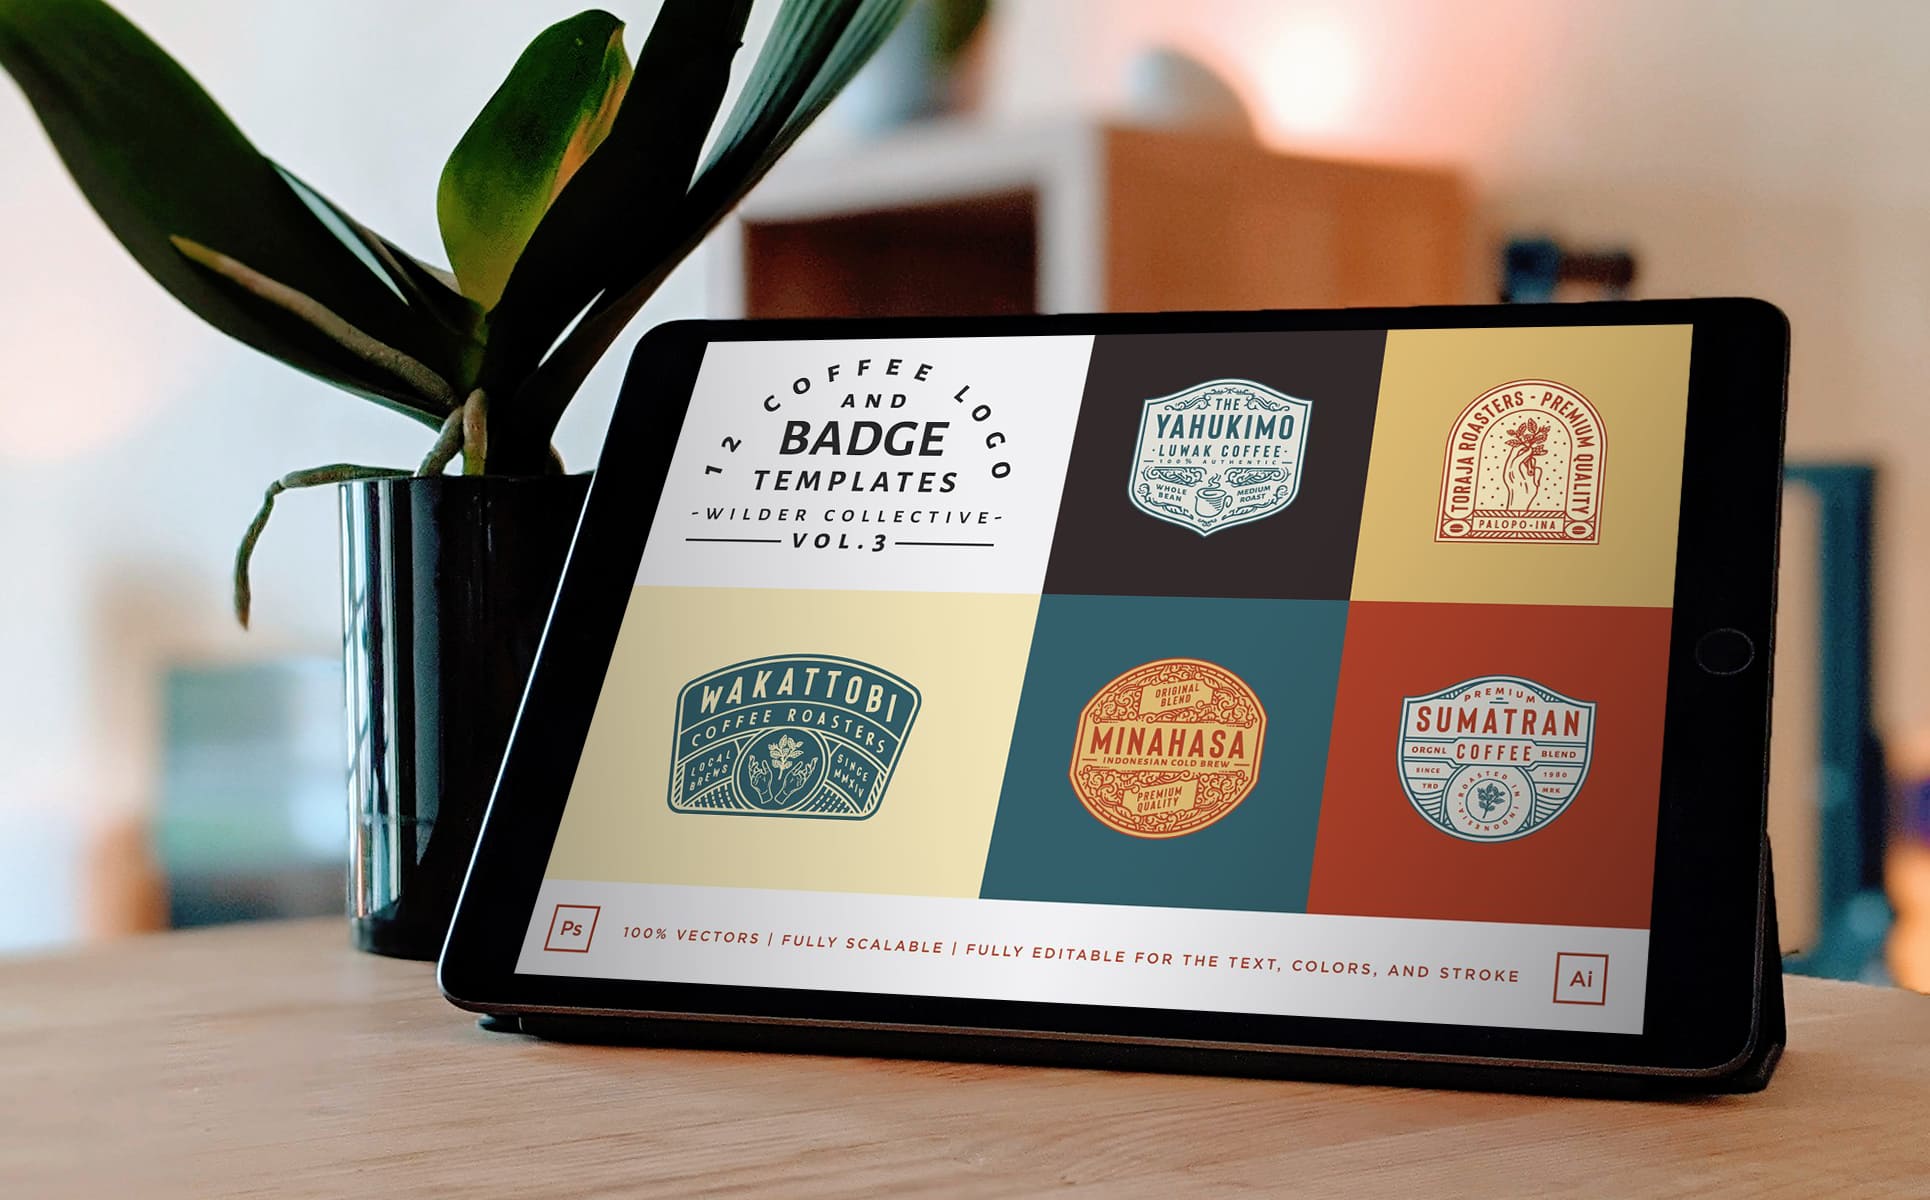 12 coffee logo and badge templates tablet mockup.